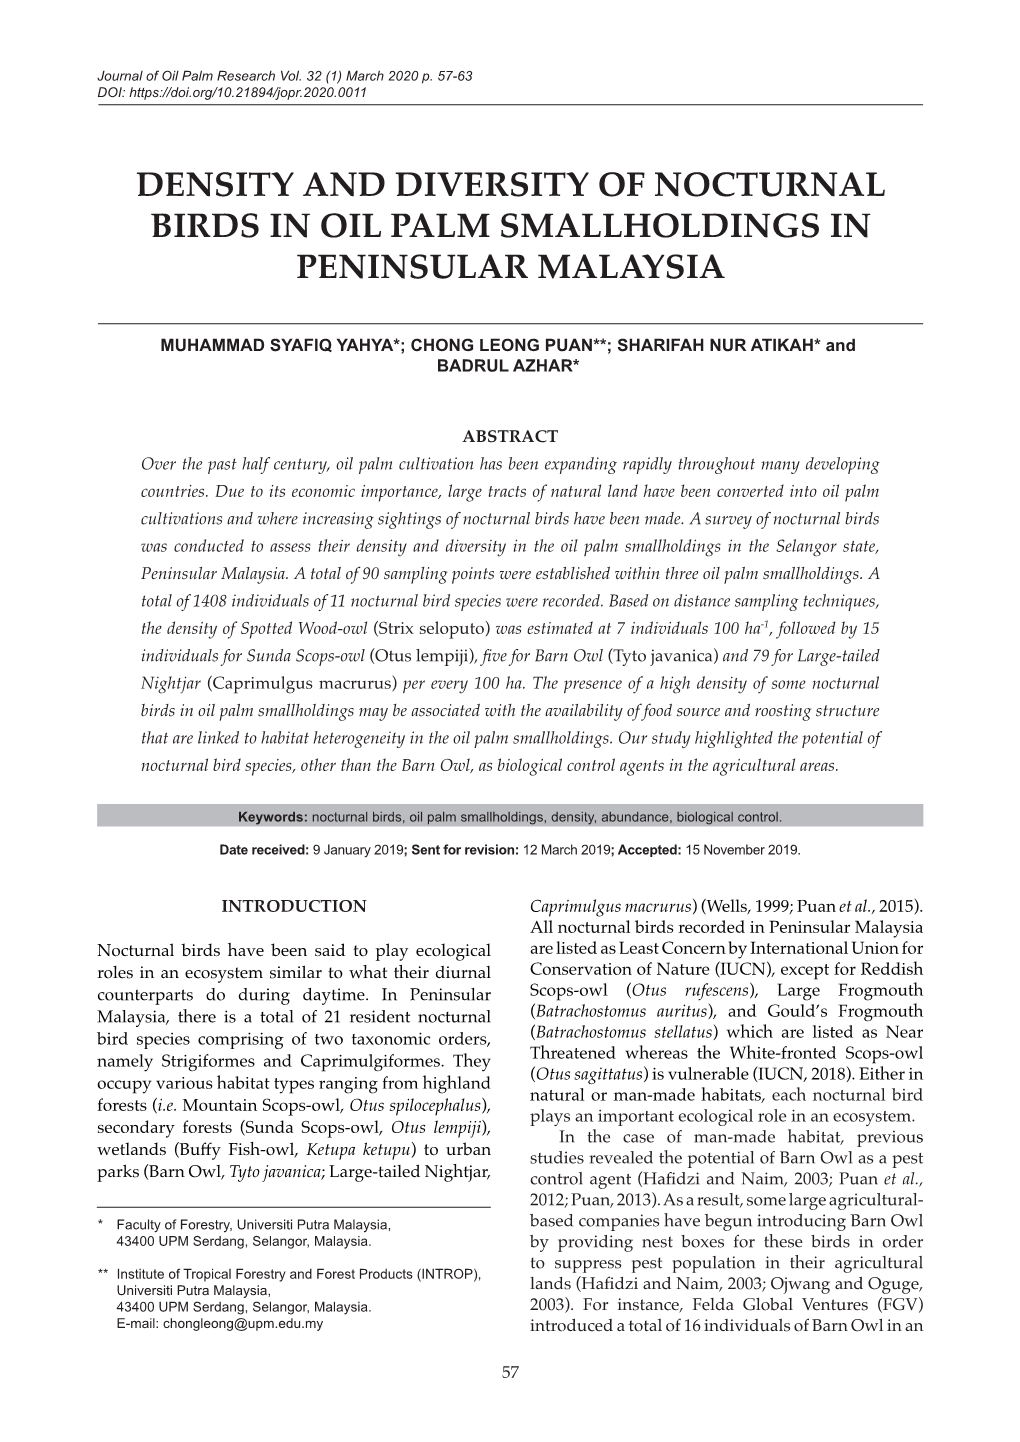 Density and Diversity of Nocturnal Birds in Oil Palm Smallholdings in Peninsular Malaysia